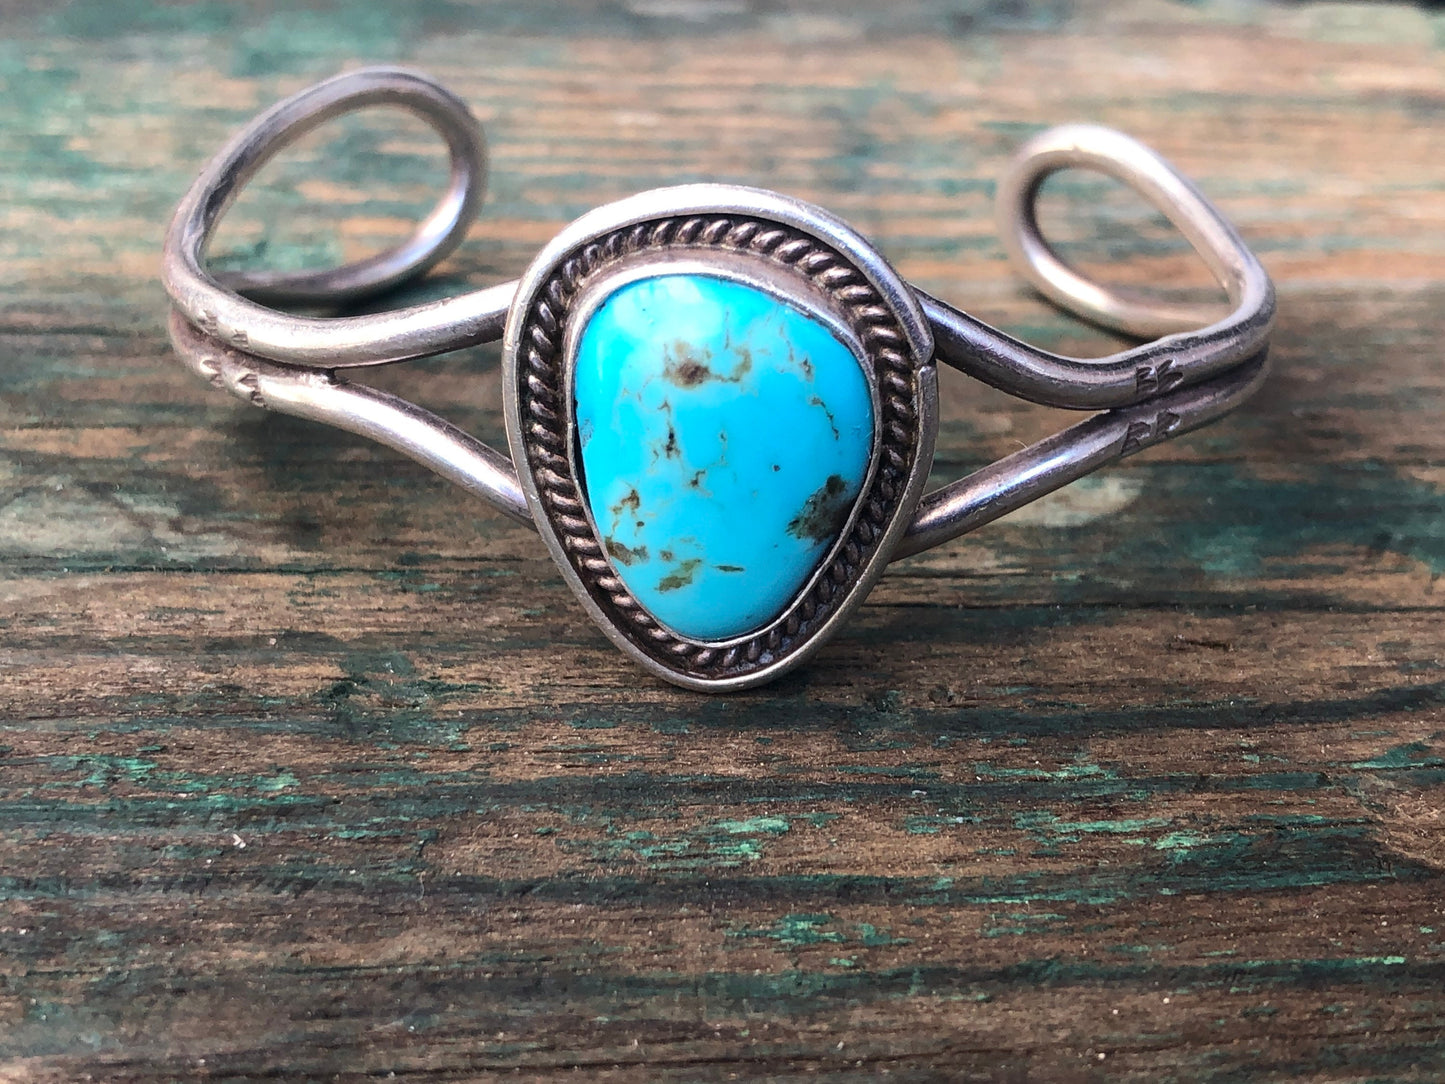 Turquoise Cabochon Native American Vintage Sterling Silver Cuff Bracelet